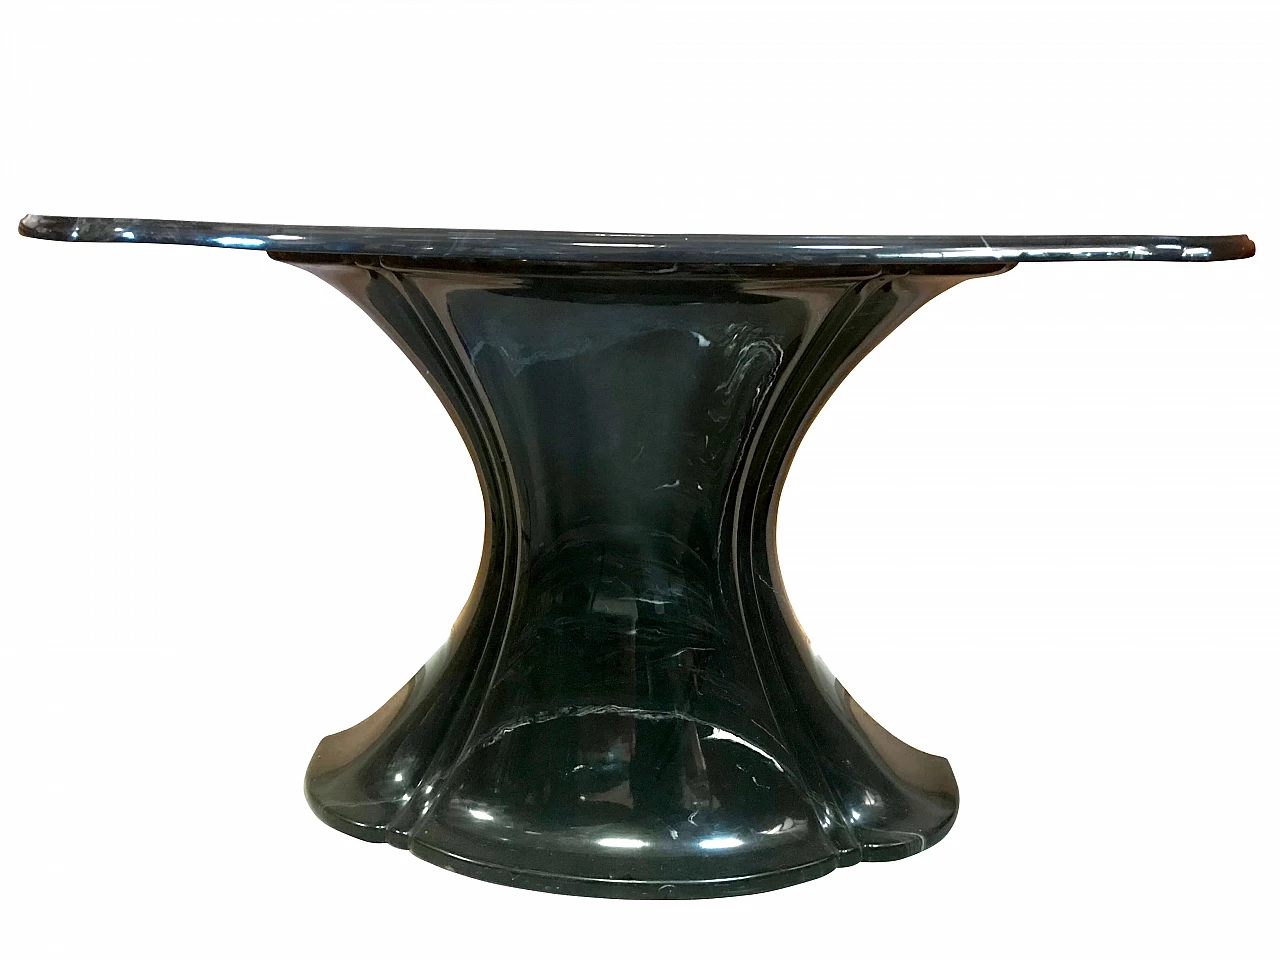 Goblet shaped moved consolle table in faux marble black resin, 60s - 70s 1170692